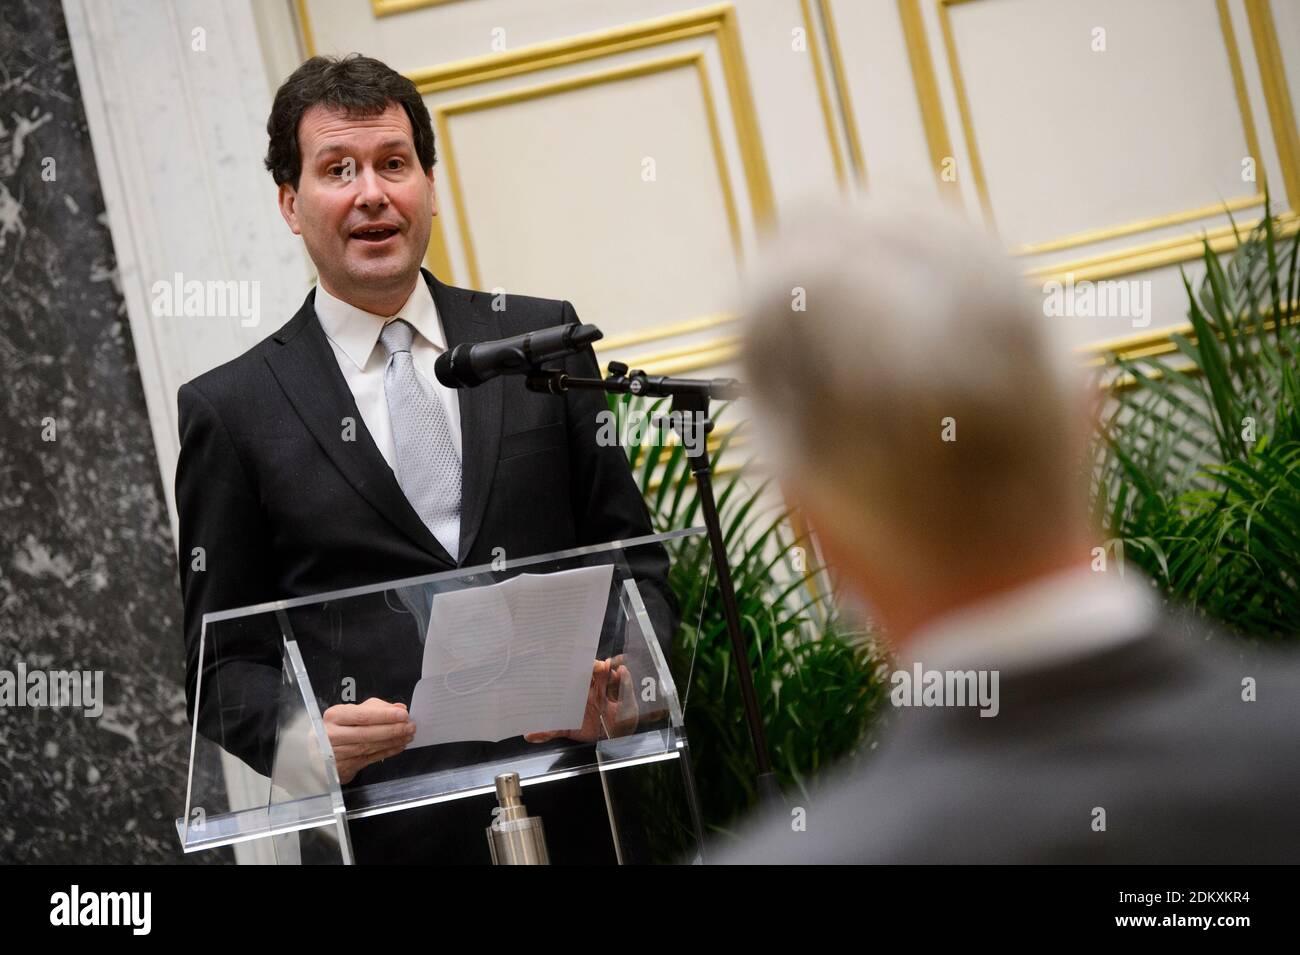 Professor Bart Loeys pictured at a ceremony to award the 'Francqui-Collen Prize 2020', Wednesday 16 December 2020, in Brussels. The scientific prize, Stock Photo